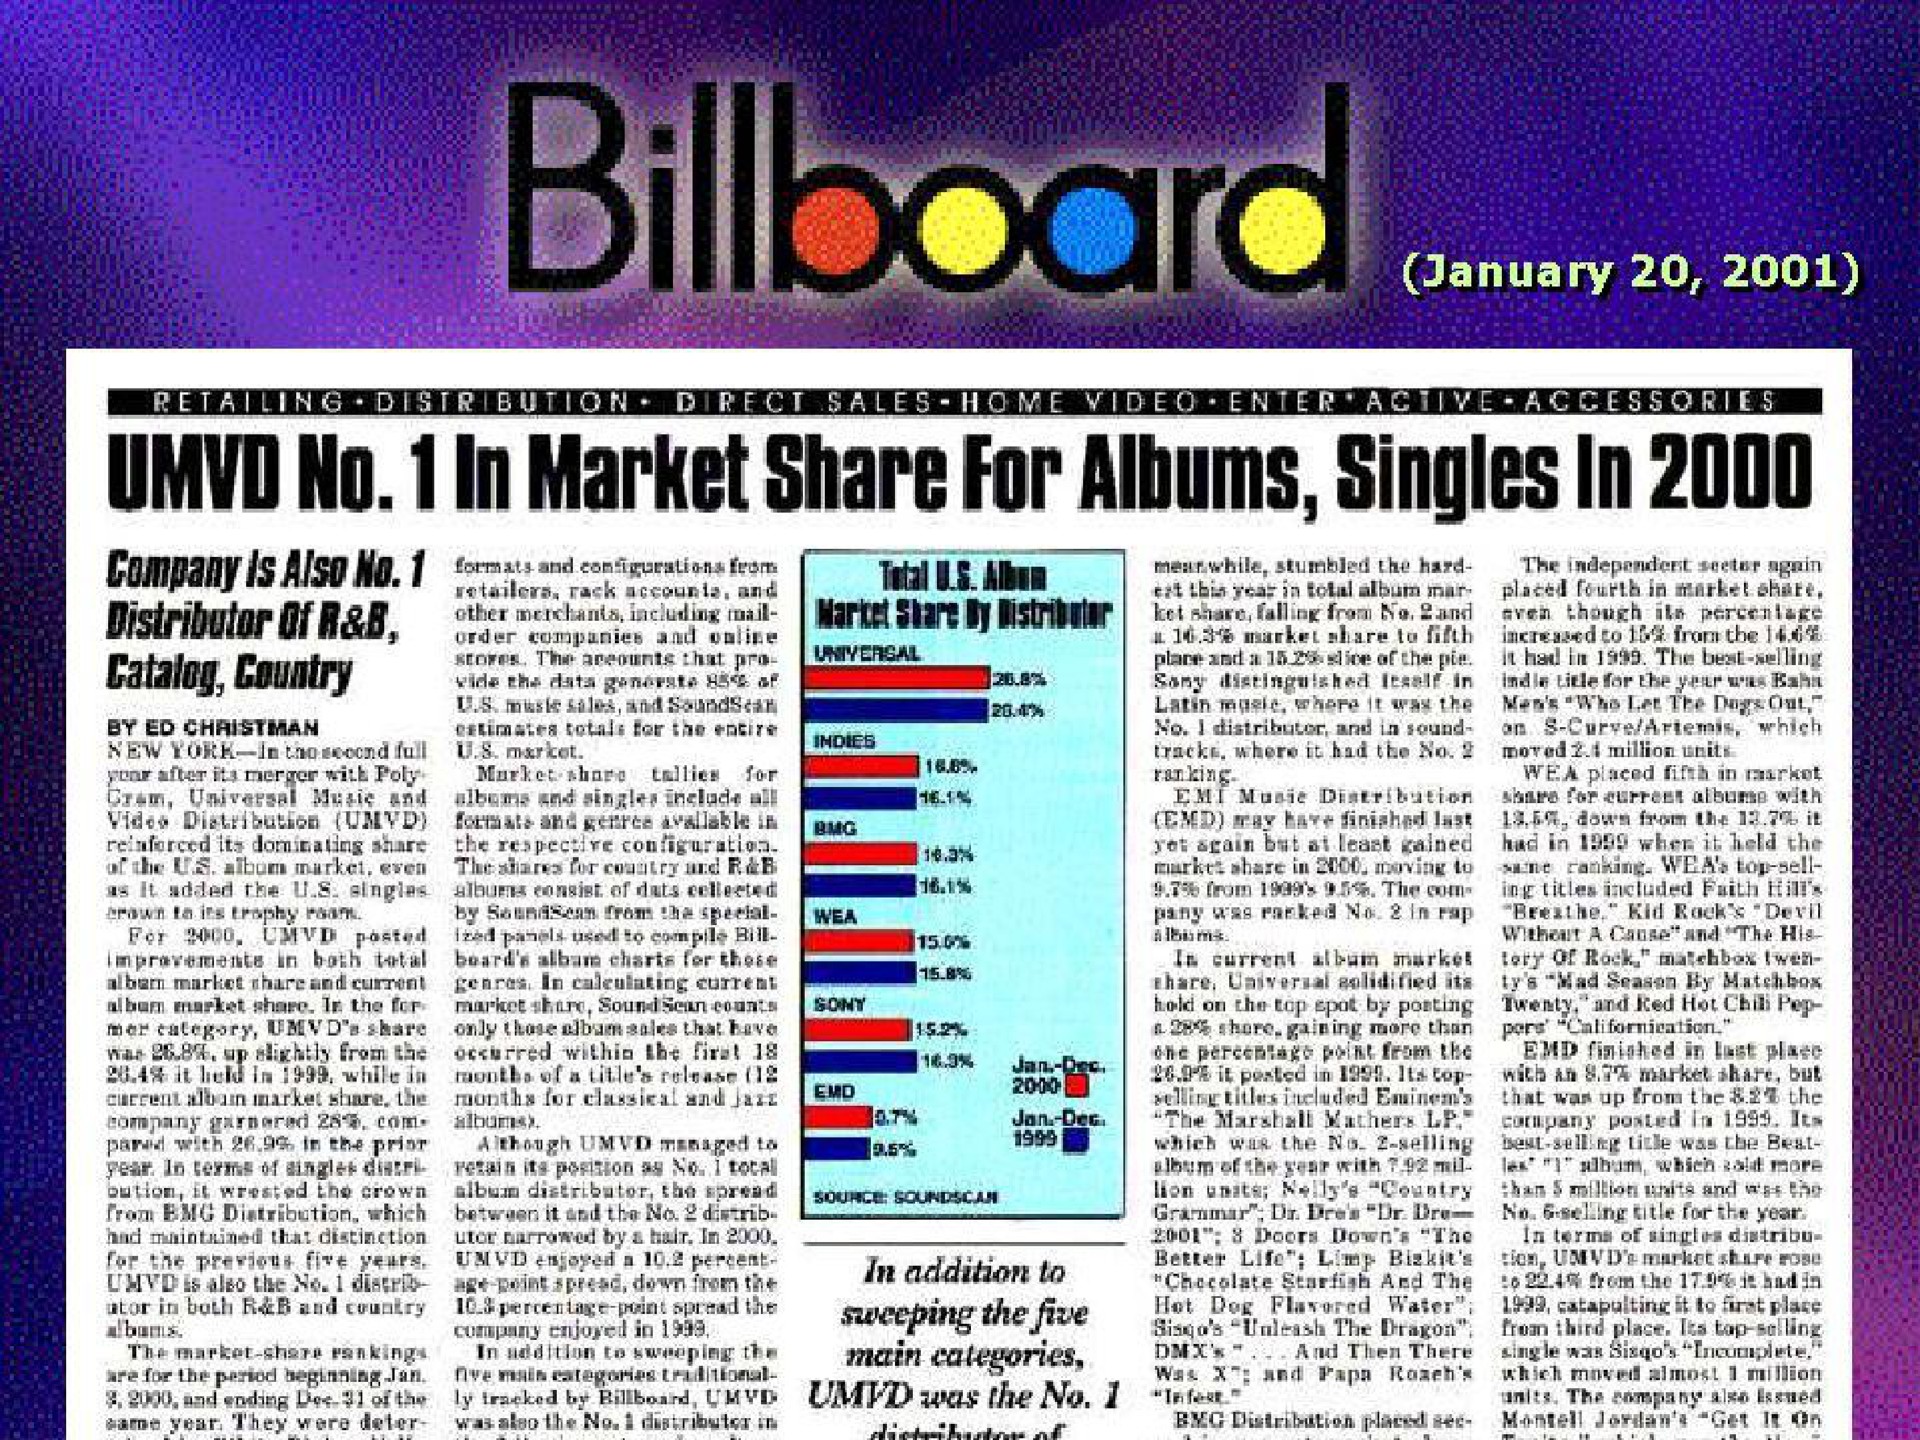 a no in market share for albums singles in | Universal Music Group